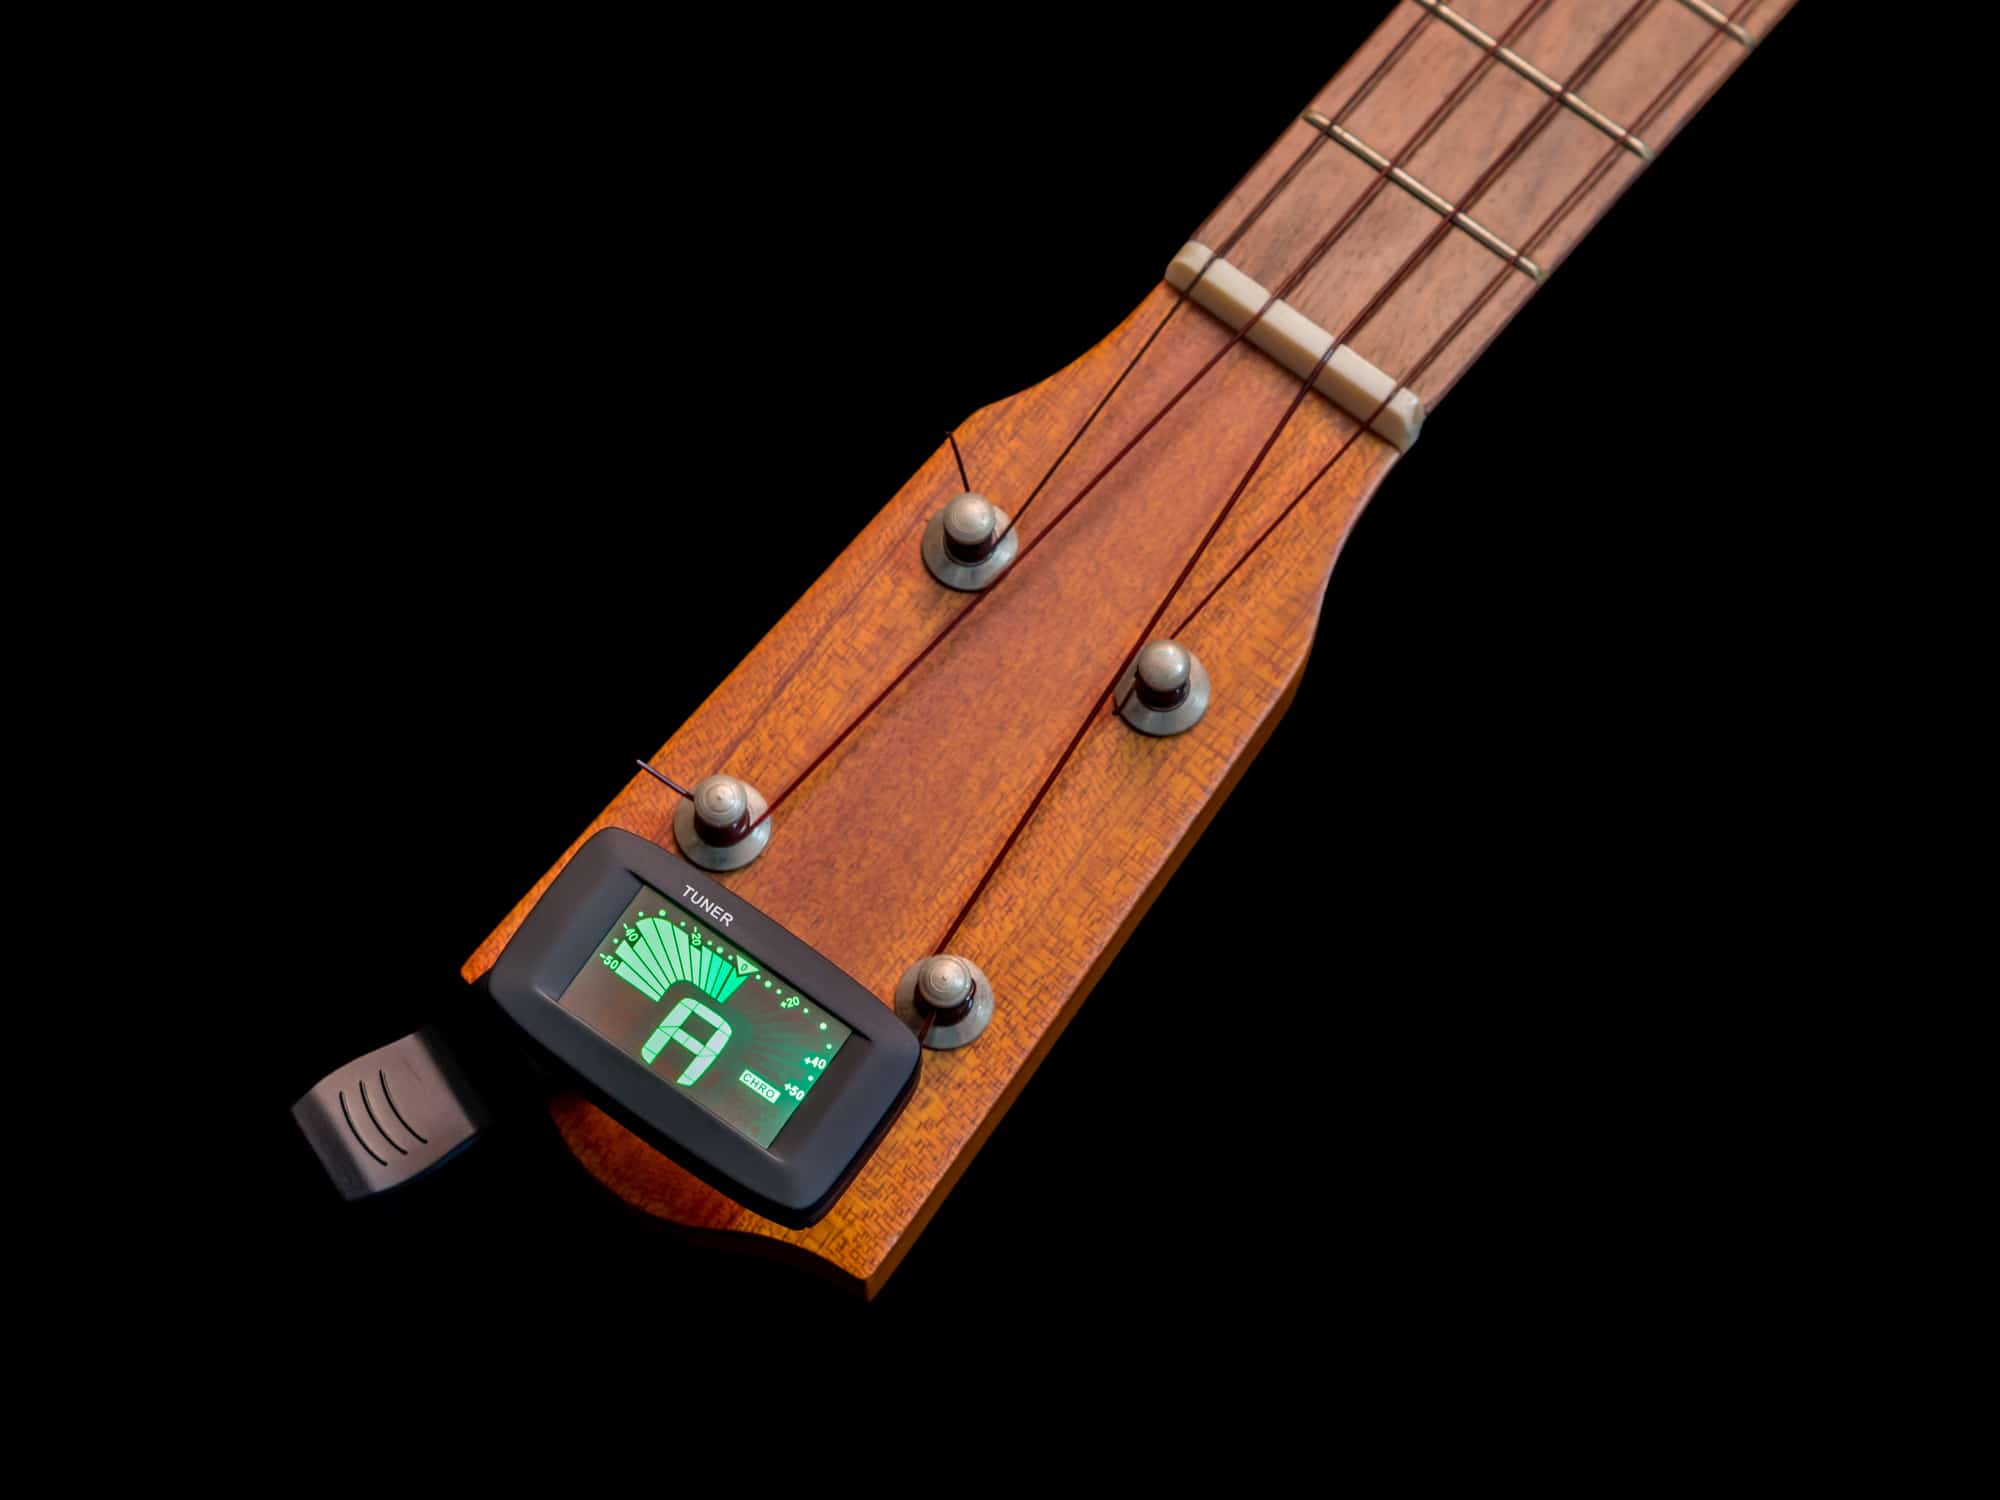 Best Ukulele Tuner in 2021: 5 Top Options for Tuning Your Uke